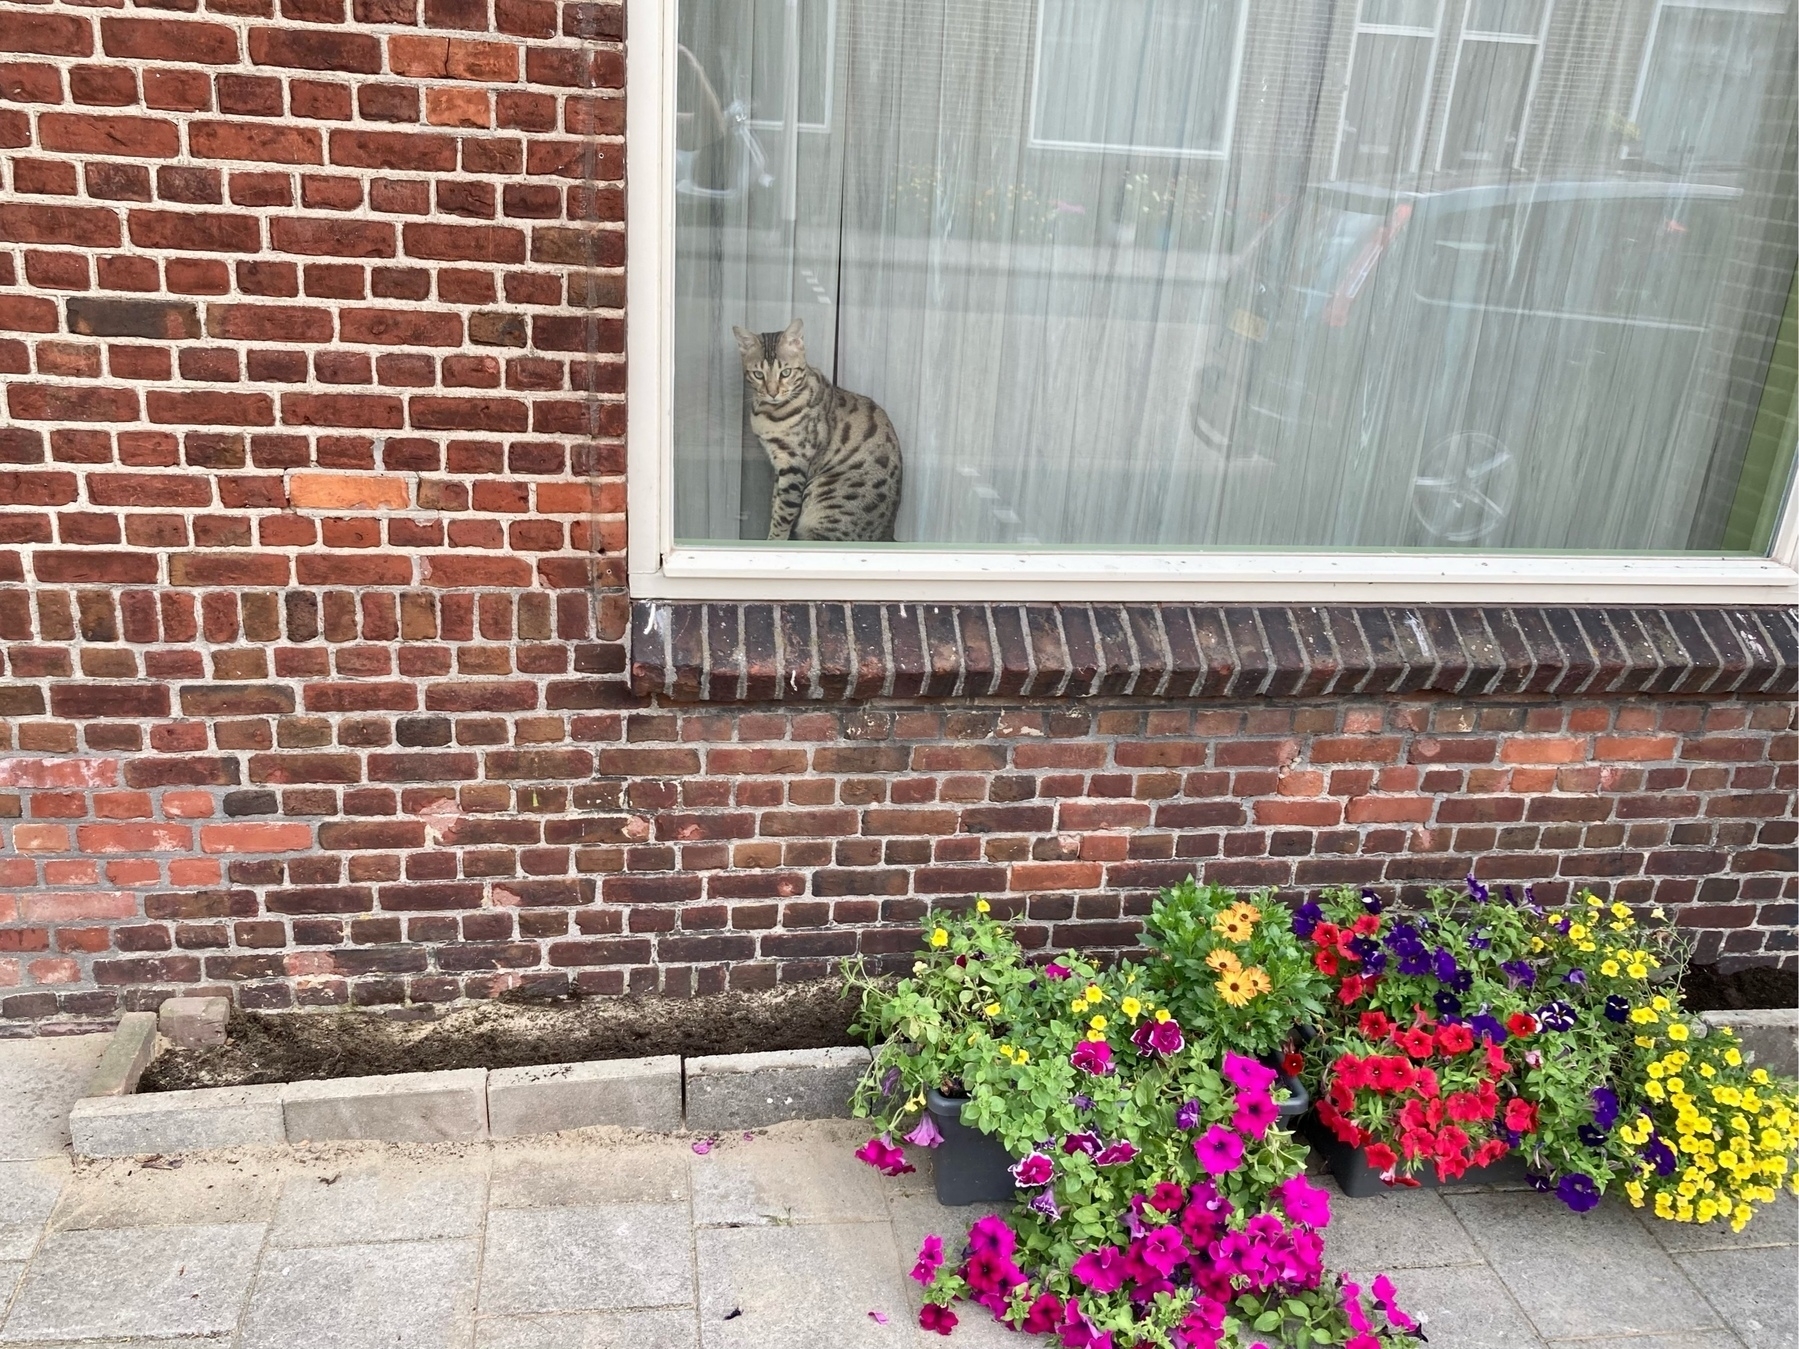 cat behind window checks the new micro garden with plants temporarily on the sidewalk 